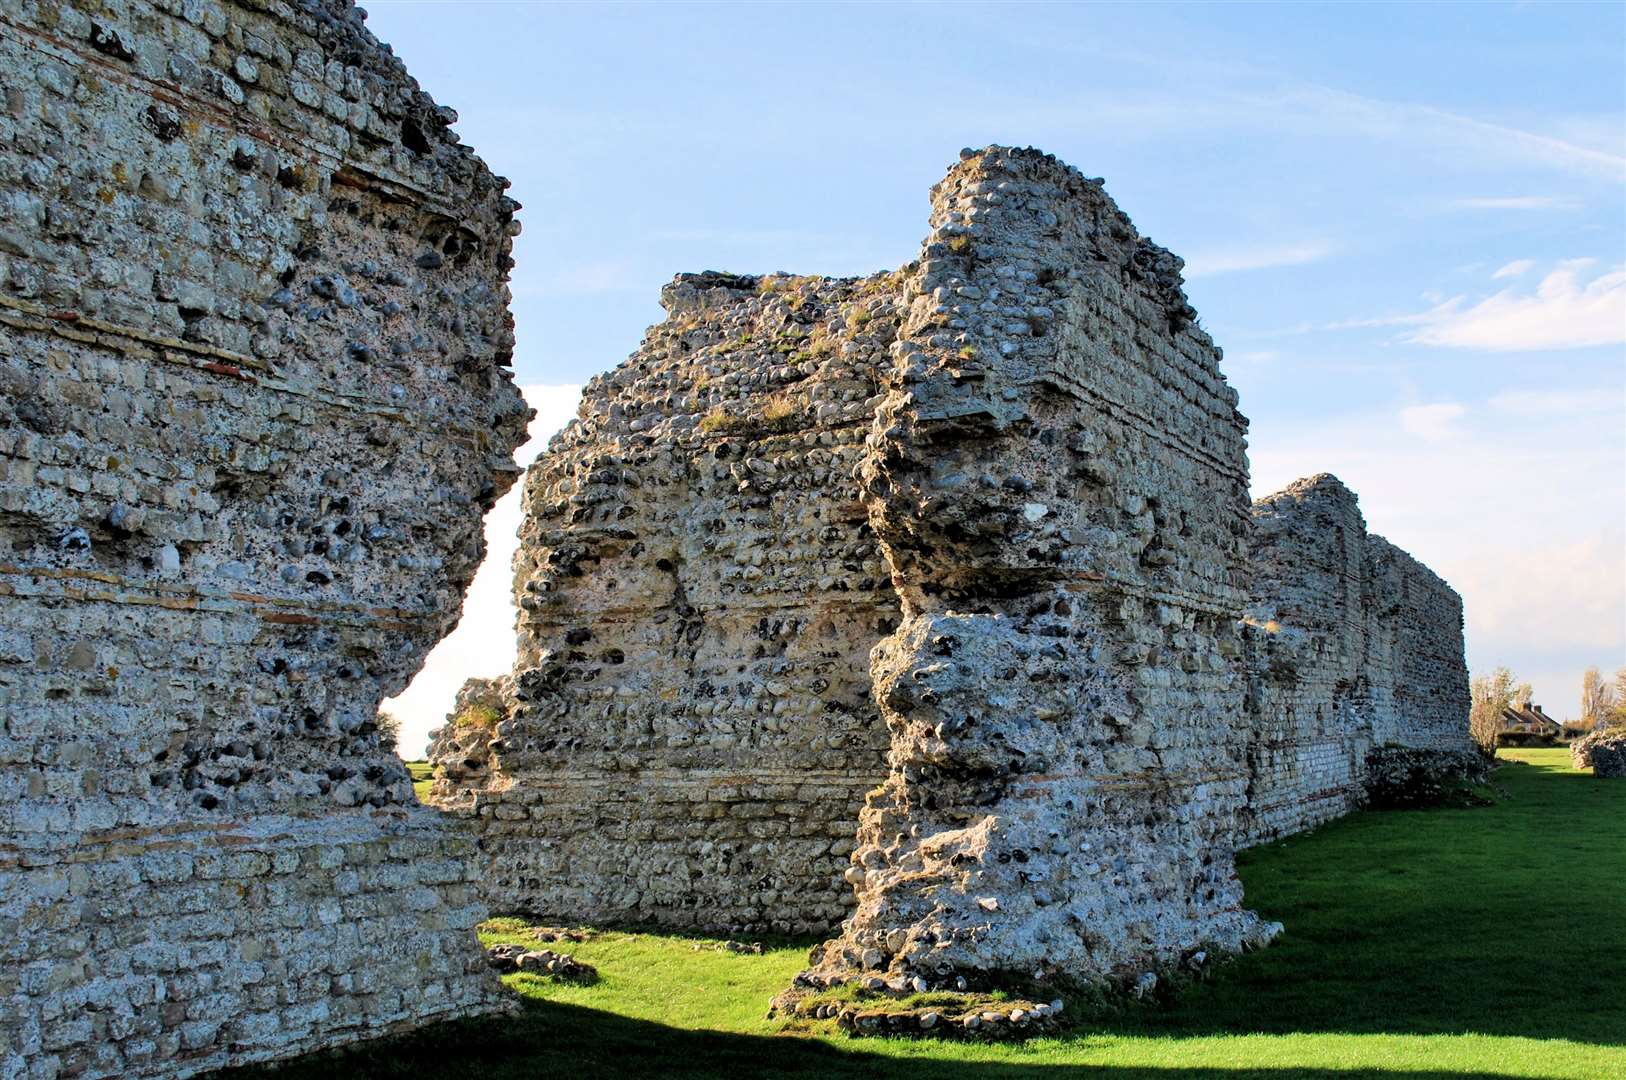 Richborough Roman Fort was the first permanent Roman settlement in Britain after the invasion by Emperor Claudian in 43 AD. Image: John Lambshead